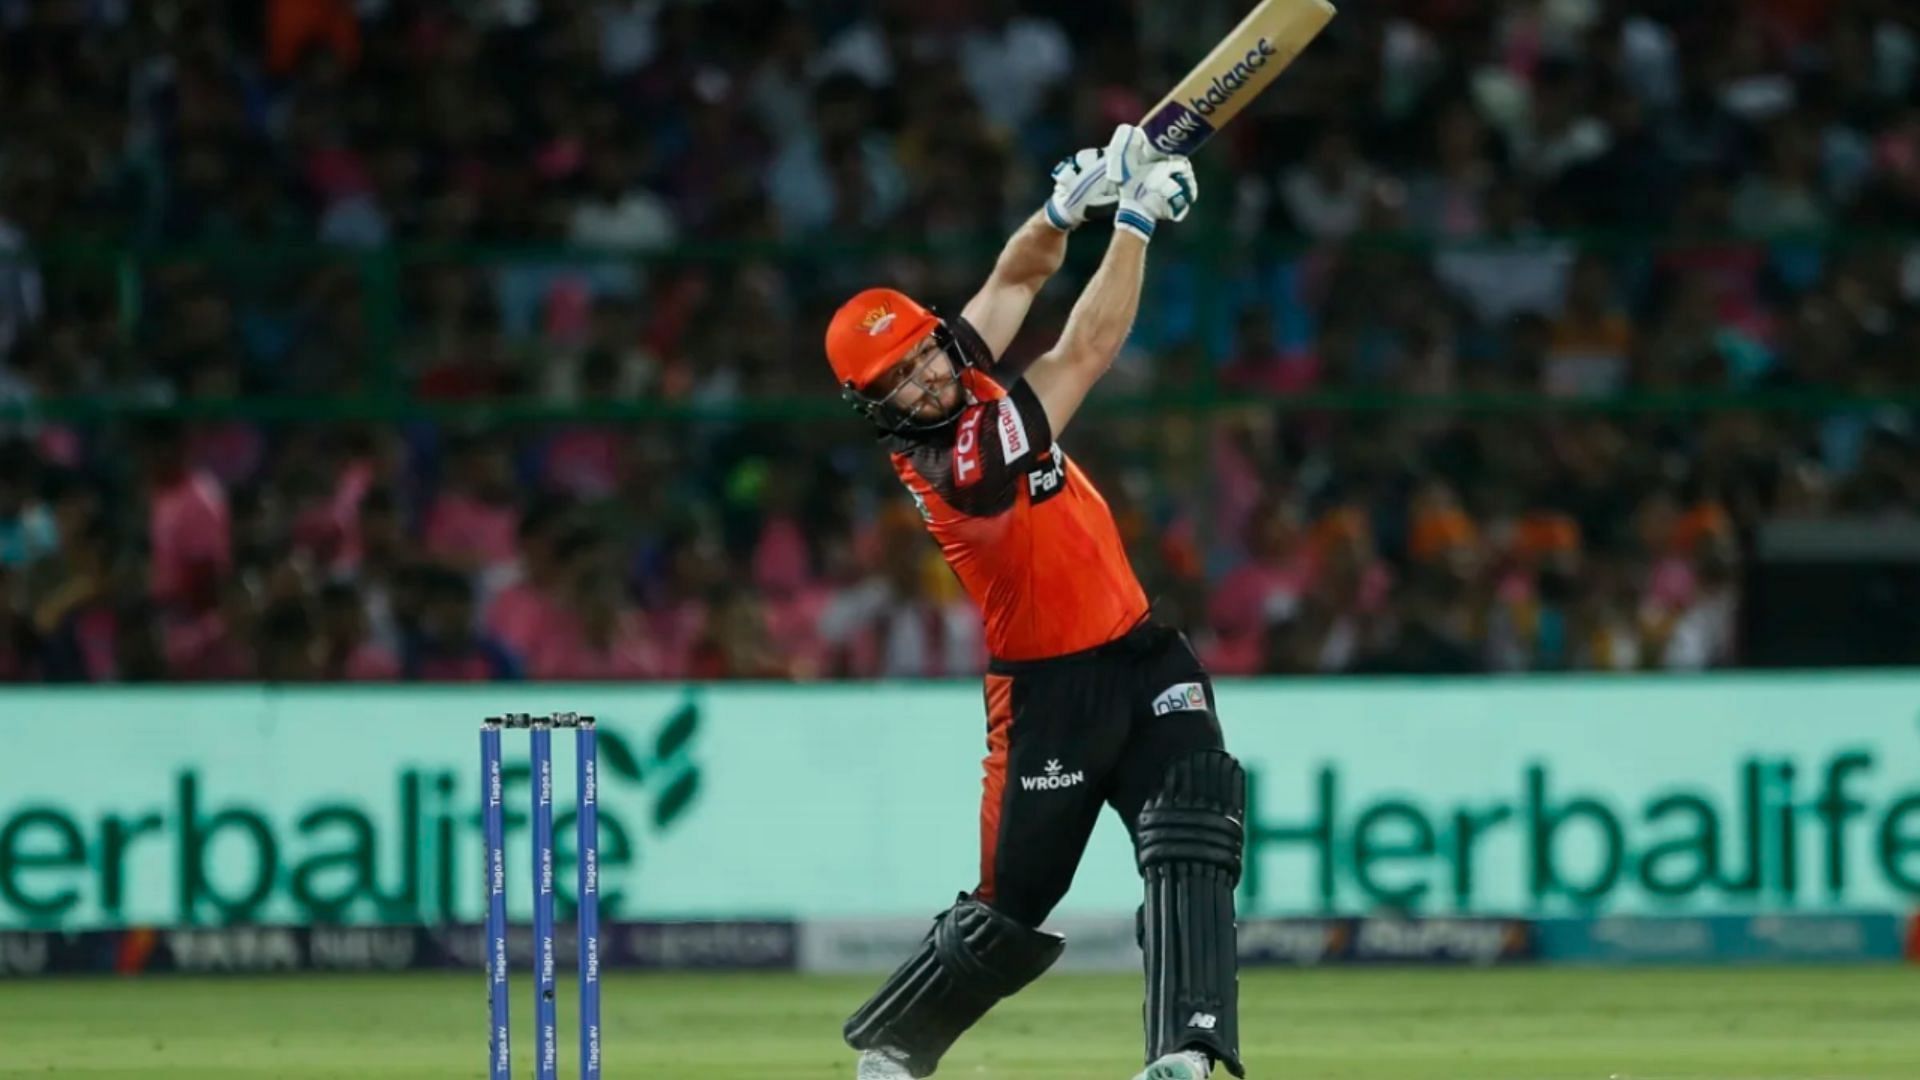 Glenn Phillips is likely to play against RR on Thursday (Image: BCCI/IPL)